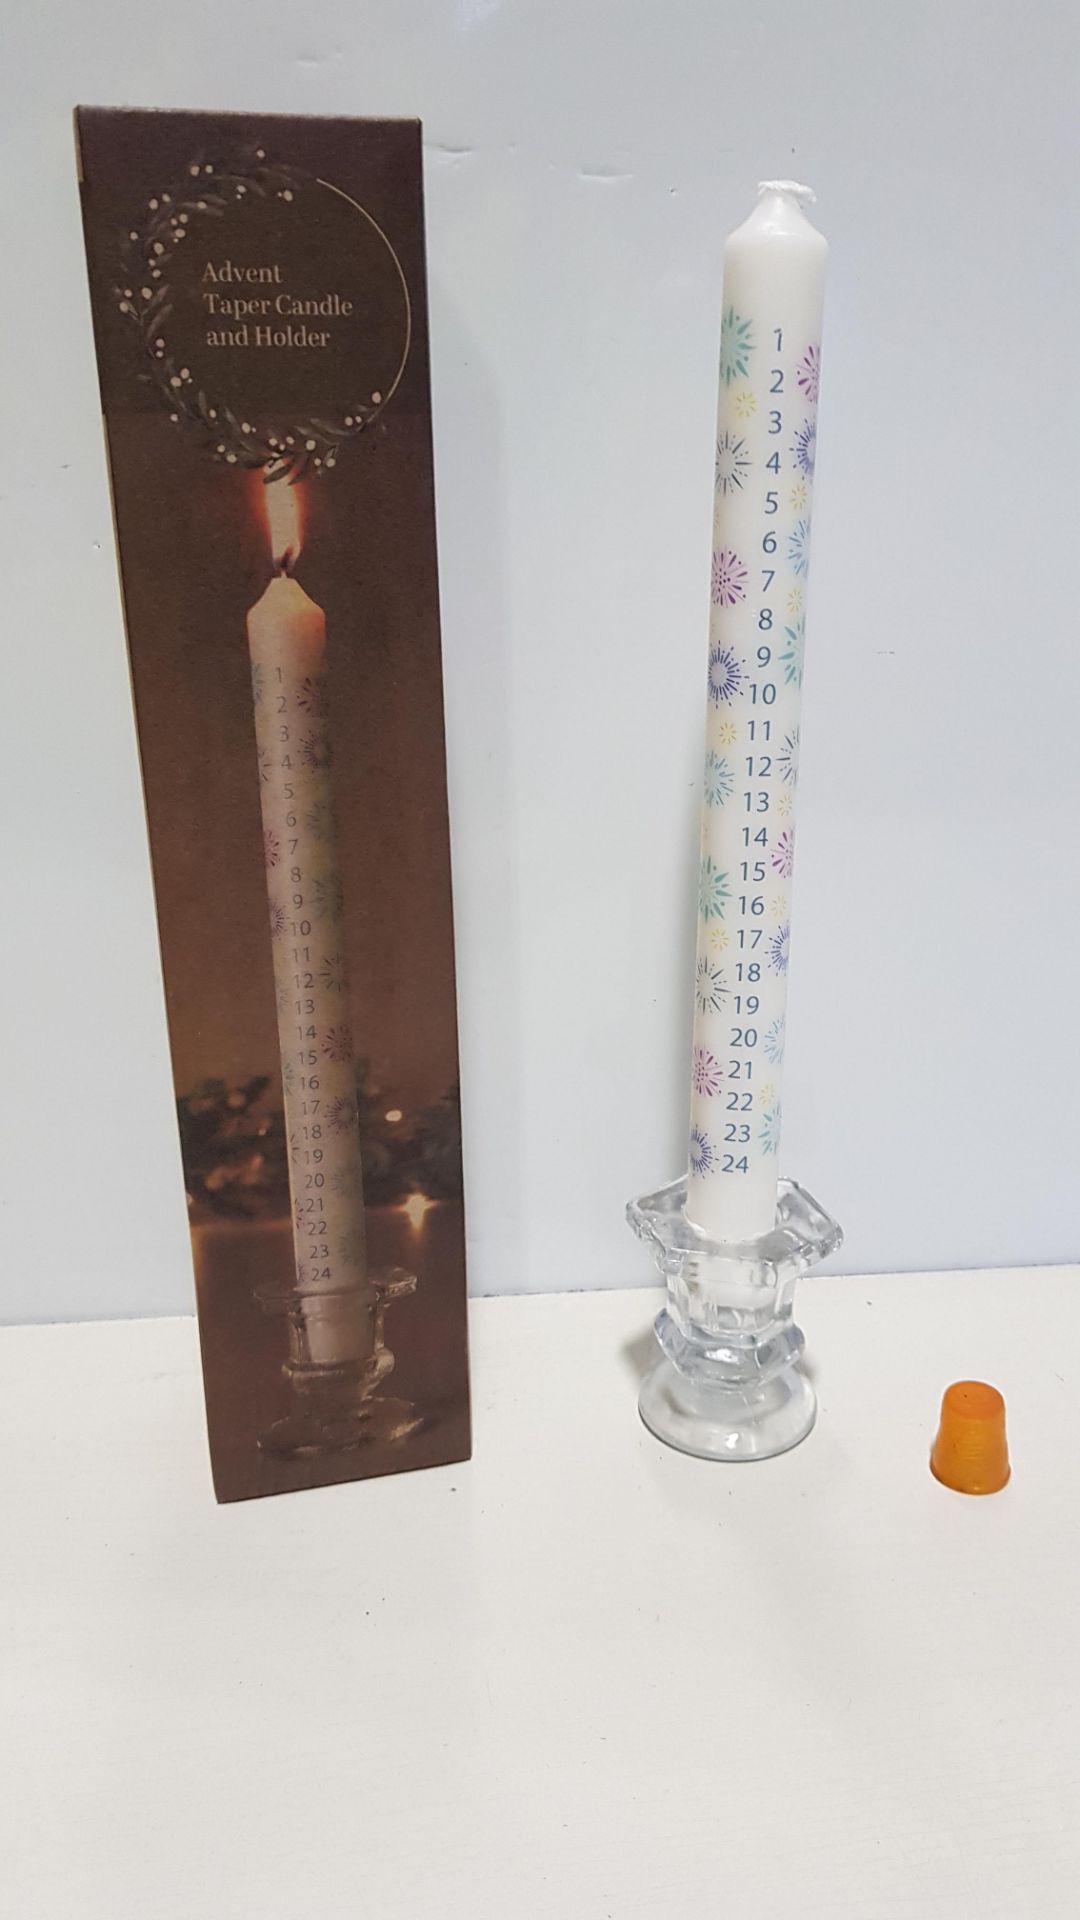 60 X BRAND NEW LAKELAND ADVENT TAPER CANDLE AND HOLDER - SIZE APPROX 5.5CM X 29 CM H - IN 2 BOXES